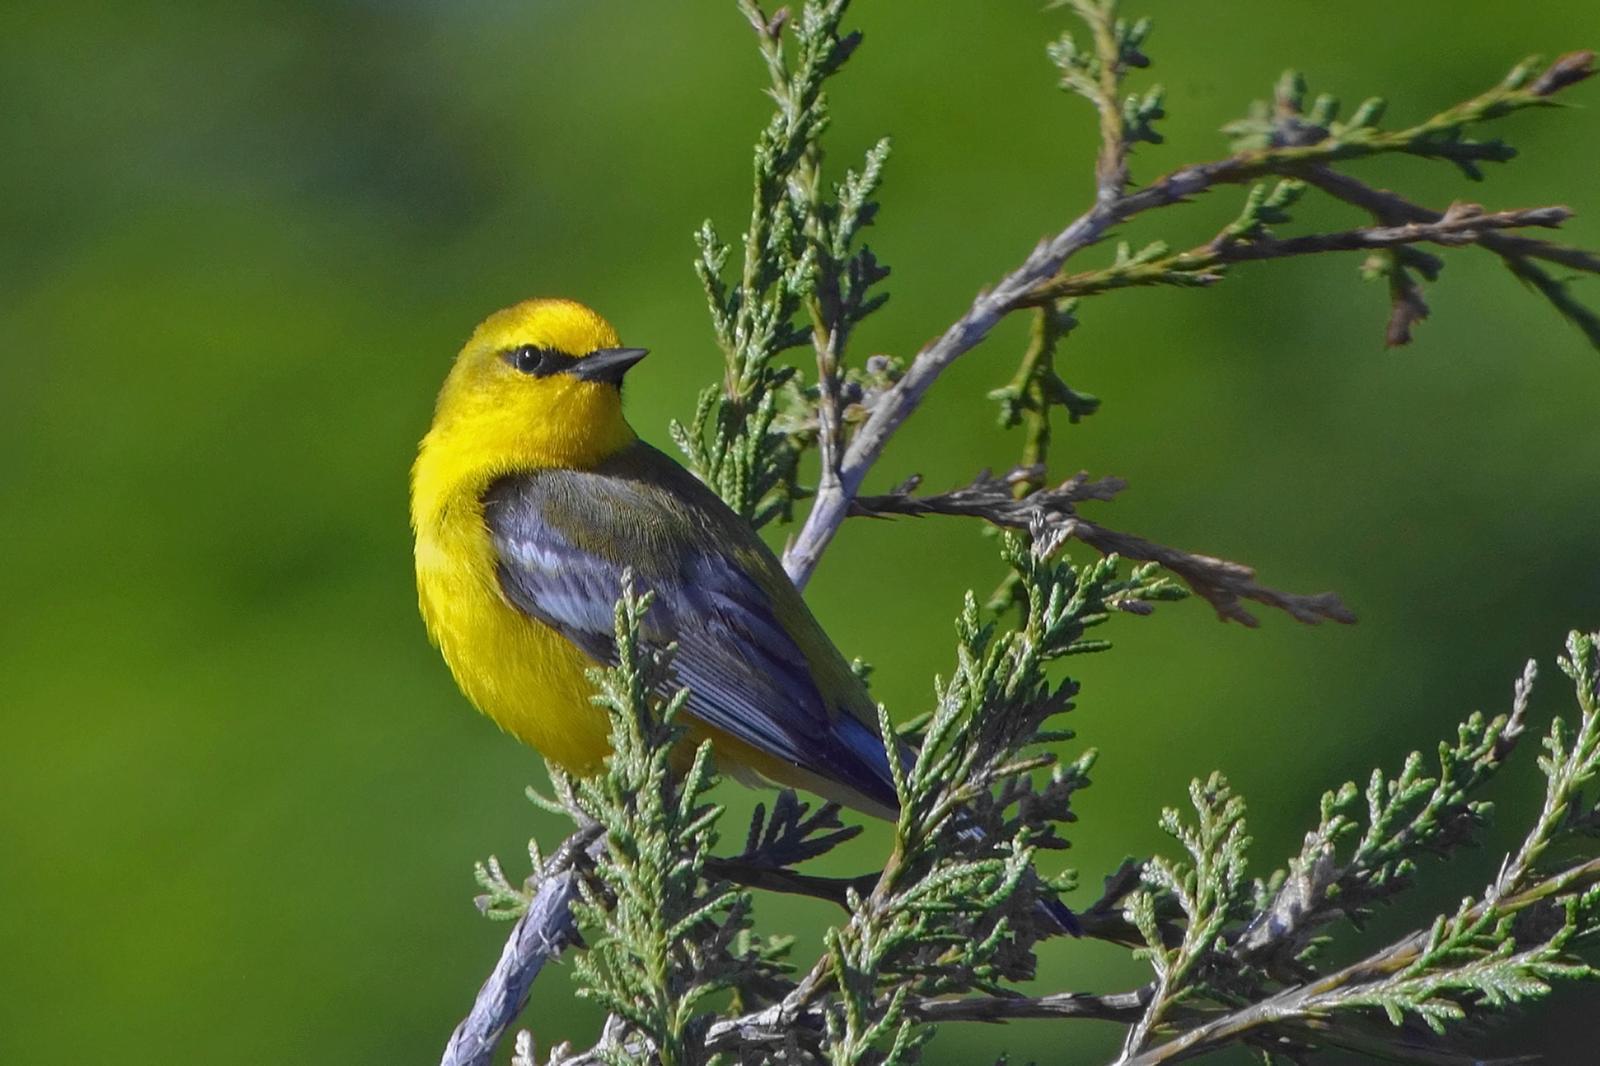 Blue-winged Warbler Photo by Joseph Pescatore